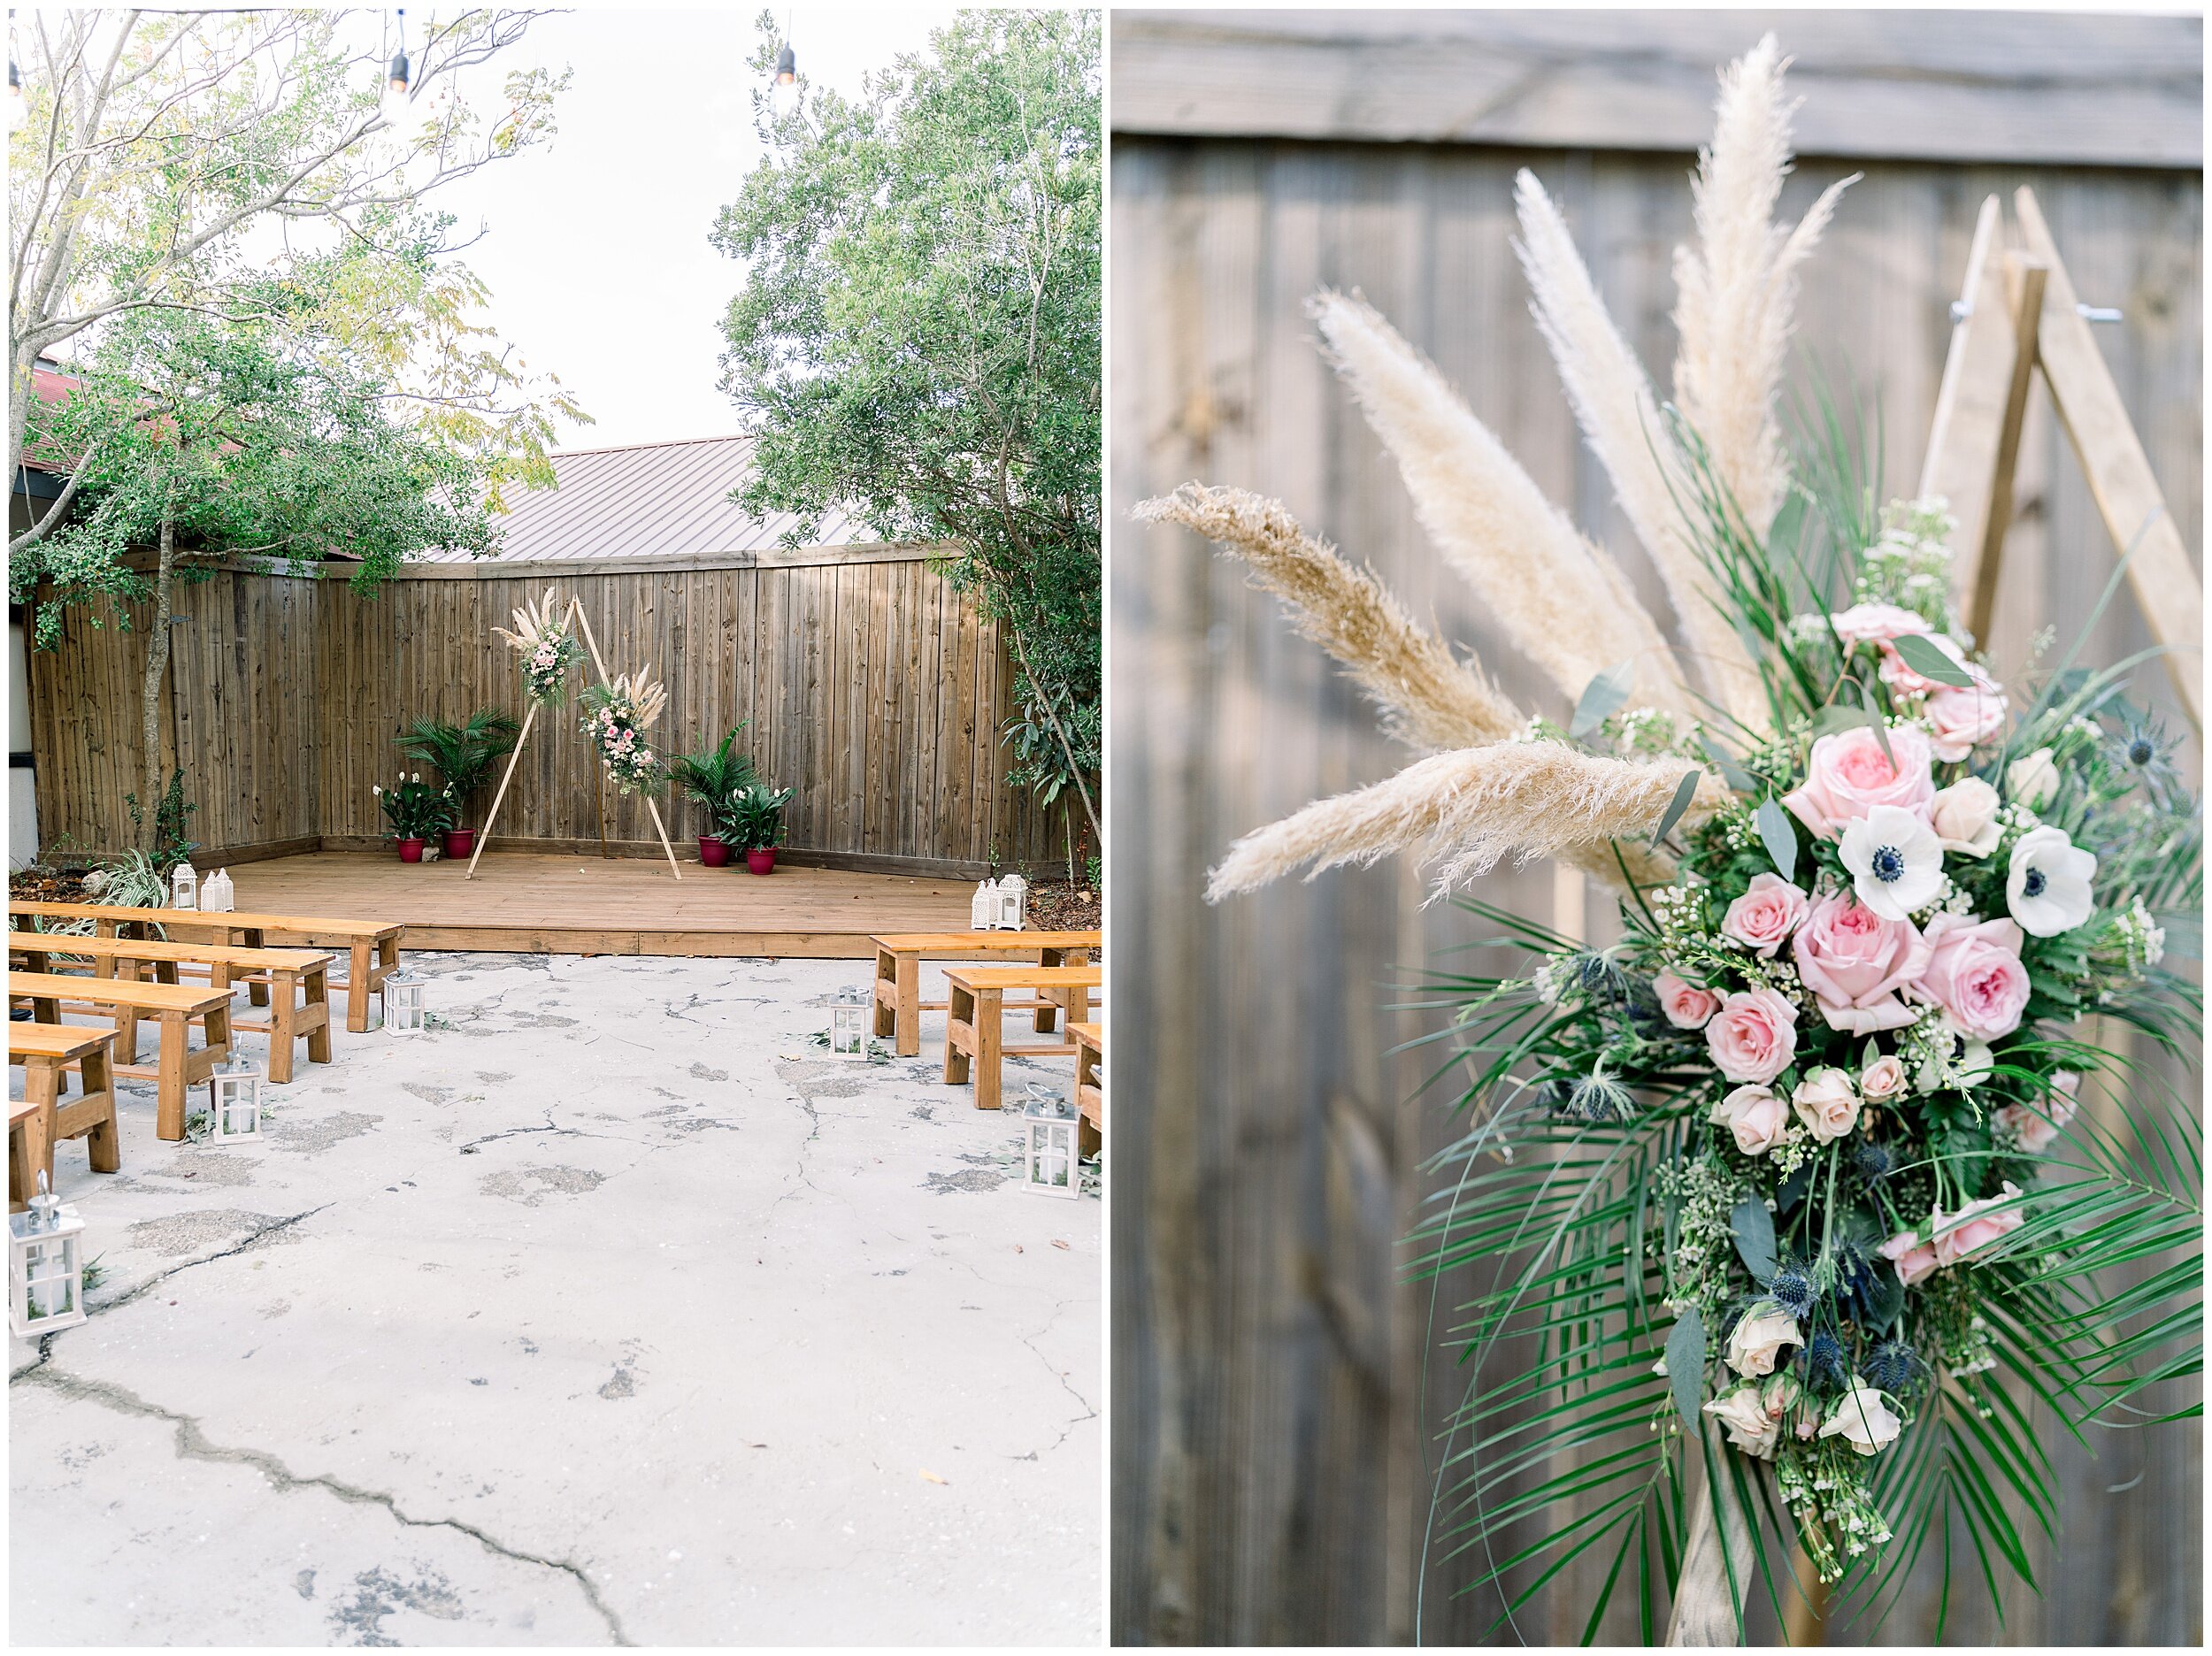 Intimate backyard garden family wedding At carriage house in St. Augustine Florida